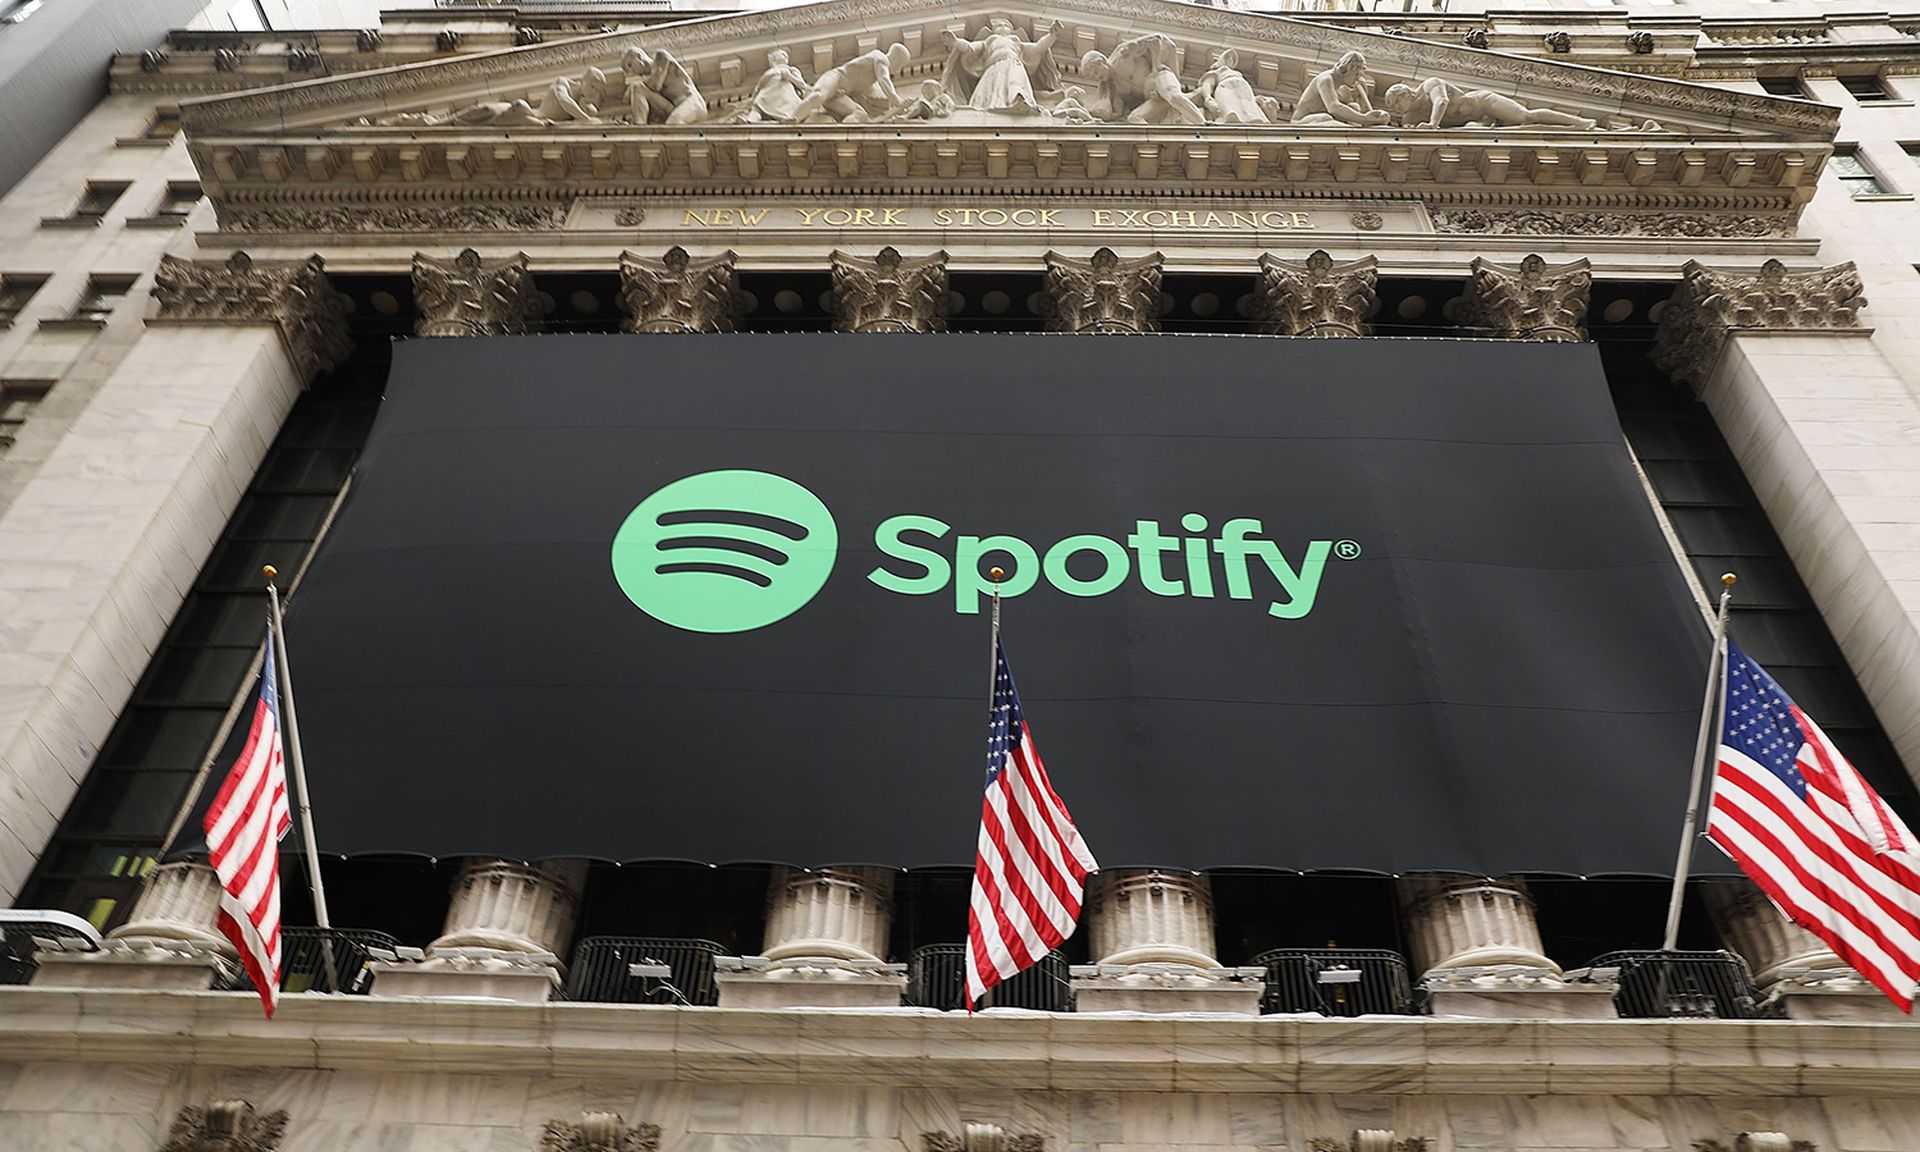 The Spotify logo is displayed on the outside of the New York Stock Exchange building.